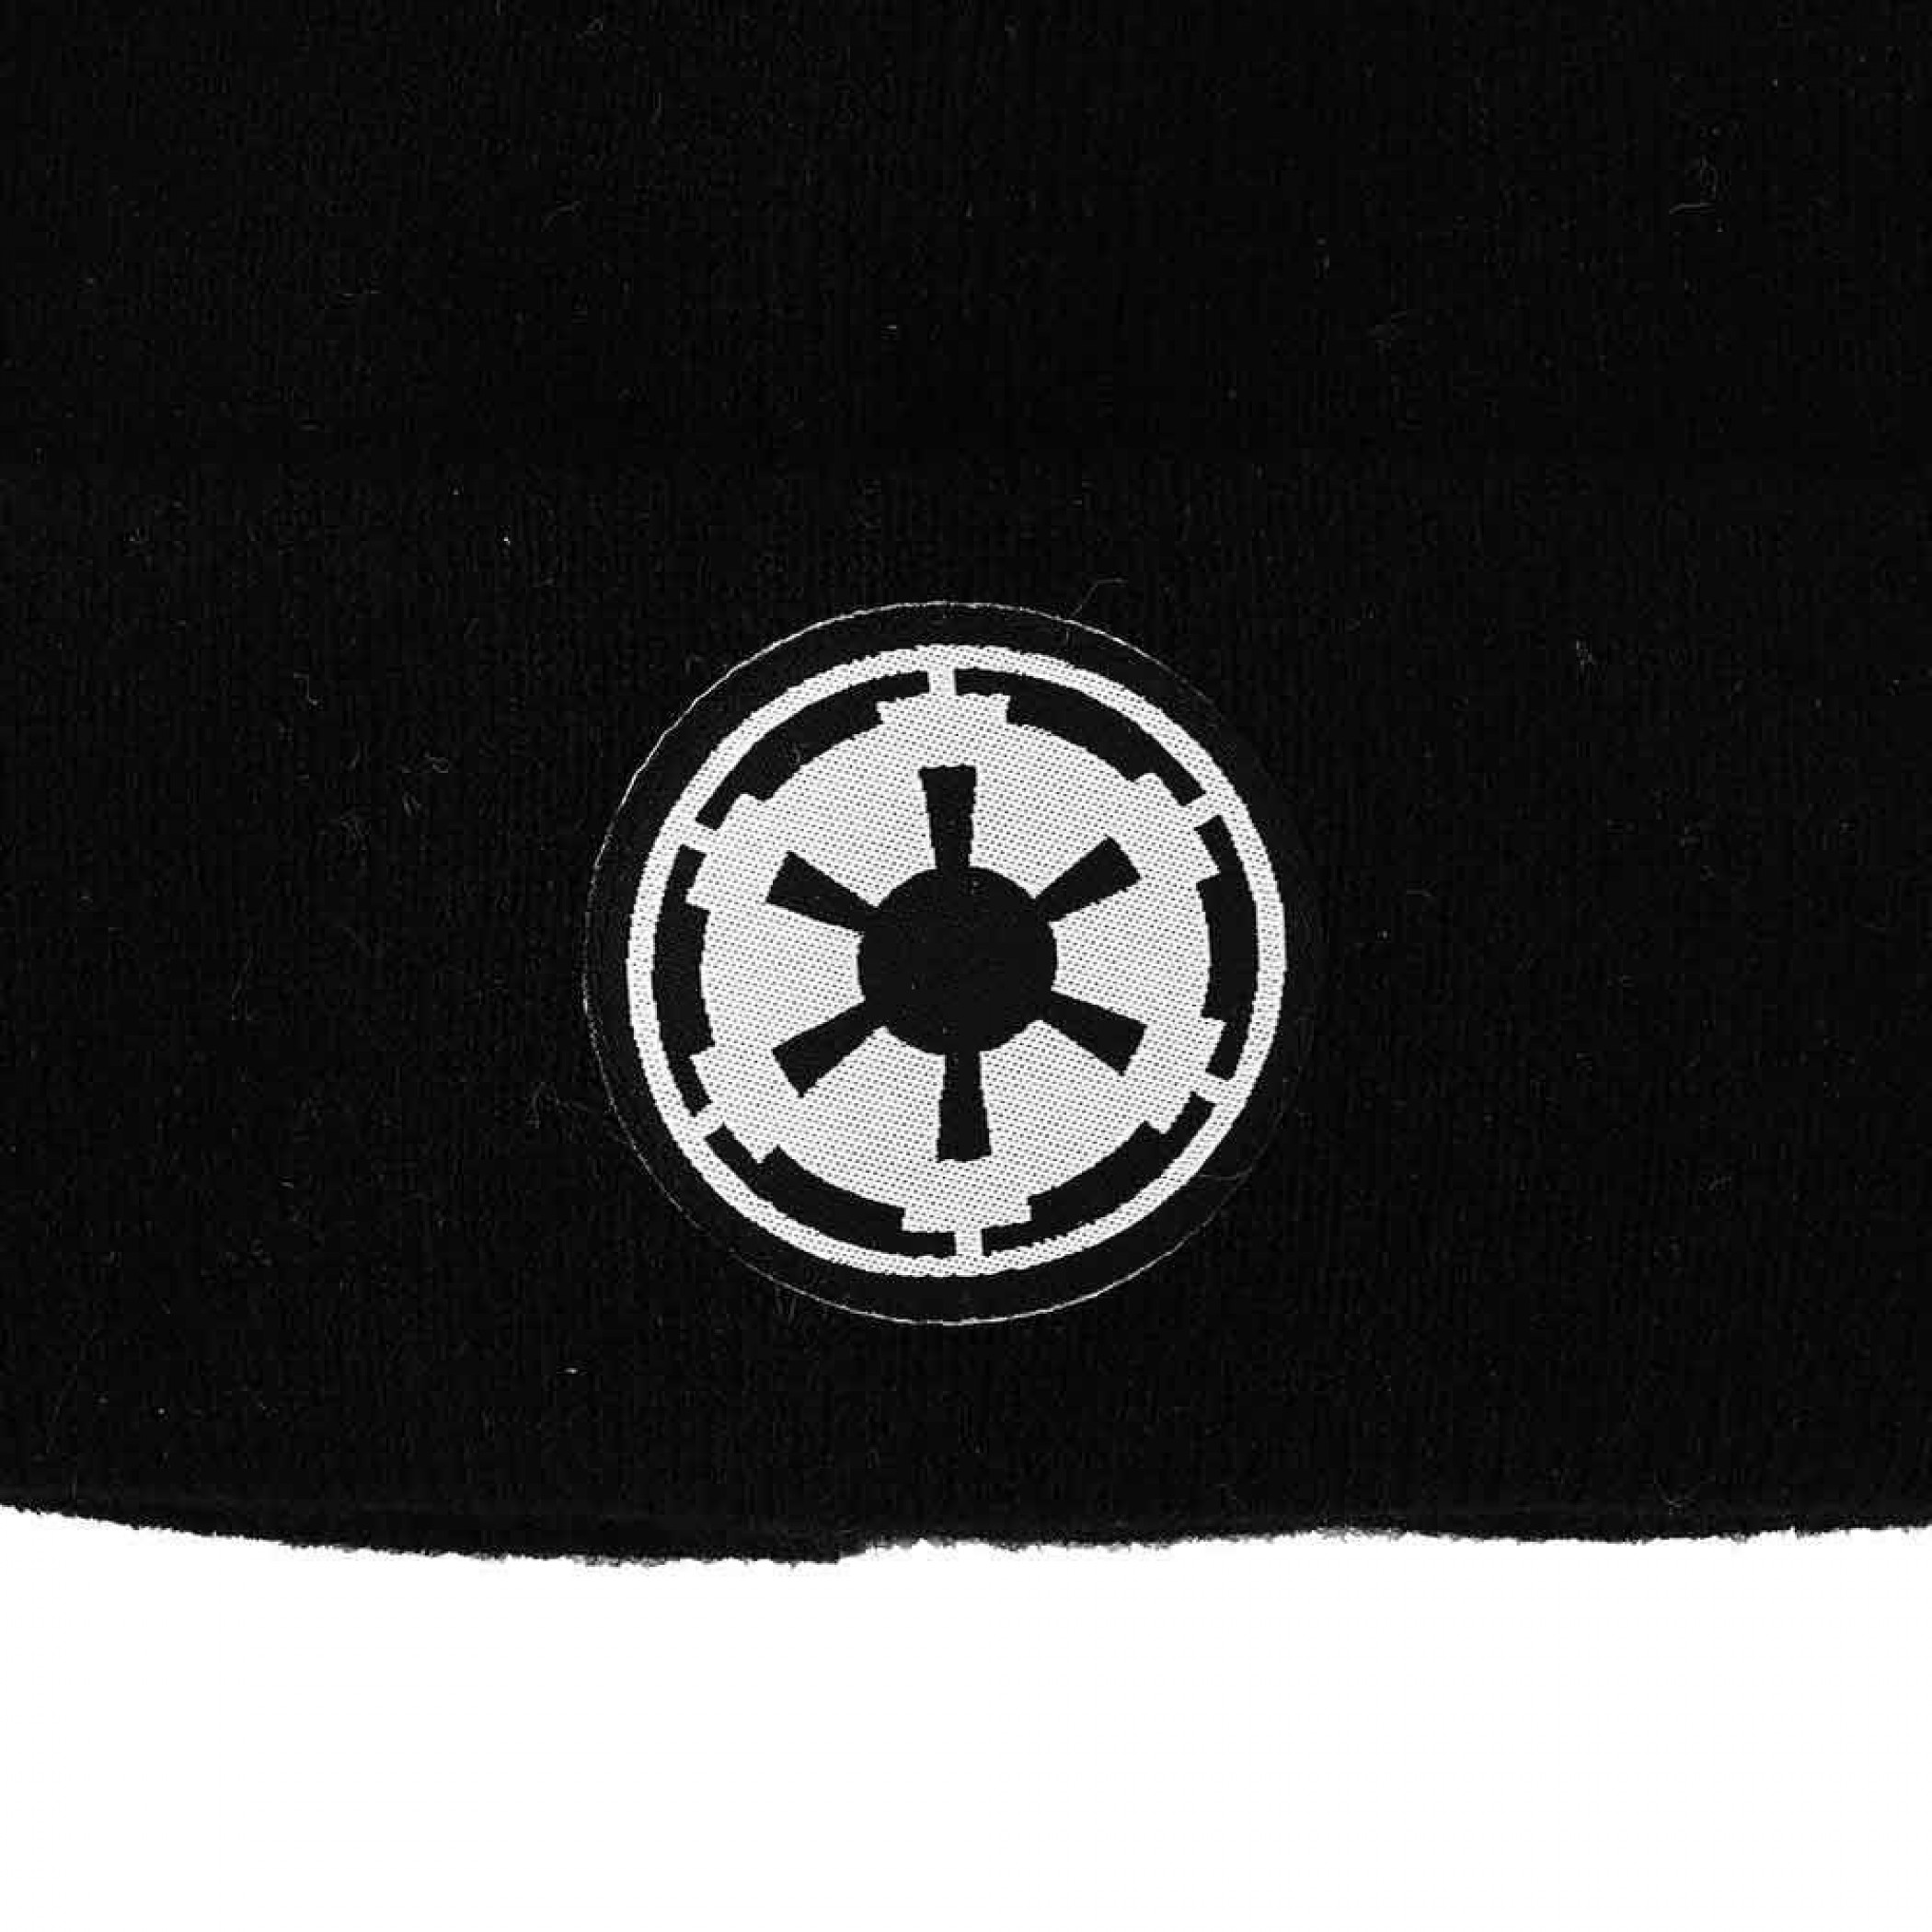 Star Wars Rebel Alliance And Galactic Empire Set of 2 Cuff Beanies